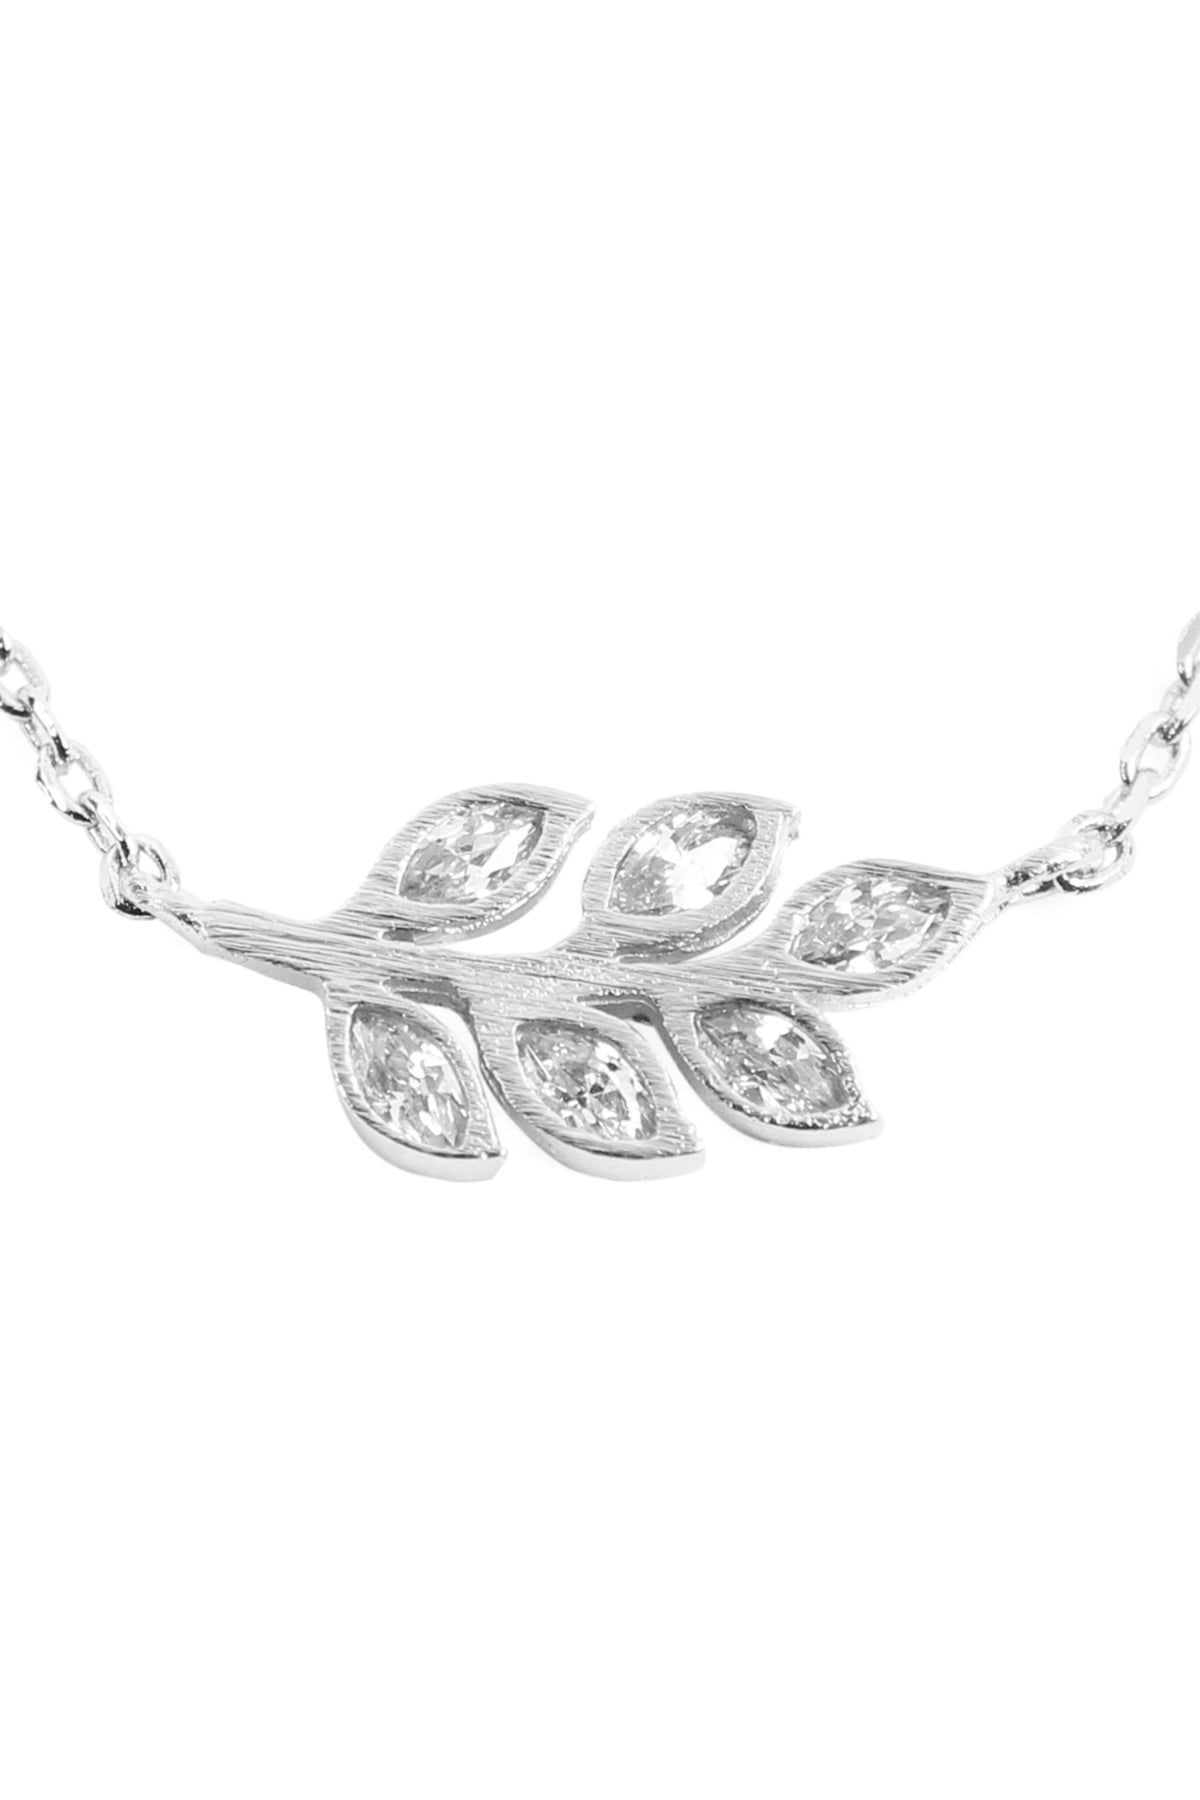 LEAVES BRANCH CRYSTAL PAVE PENDANT NECKLACE